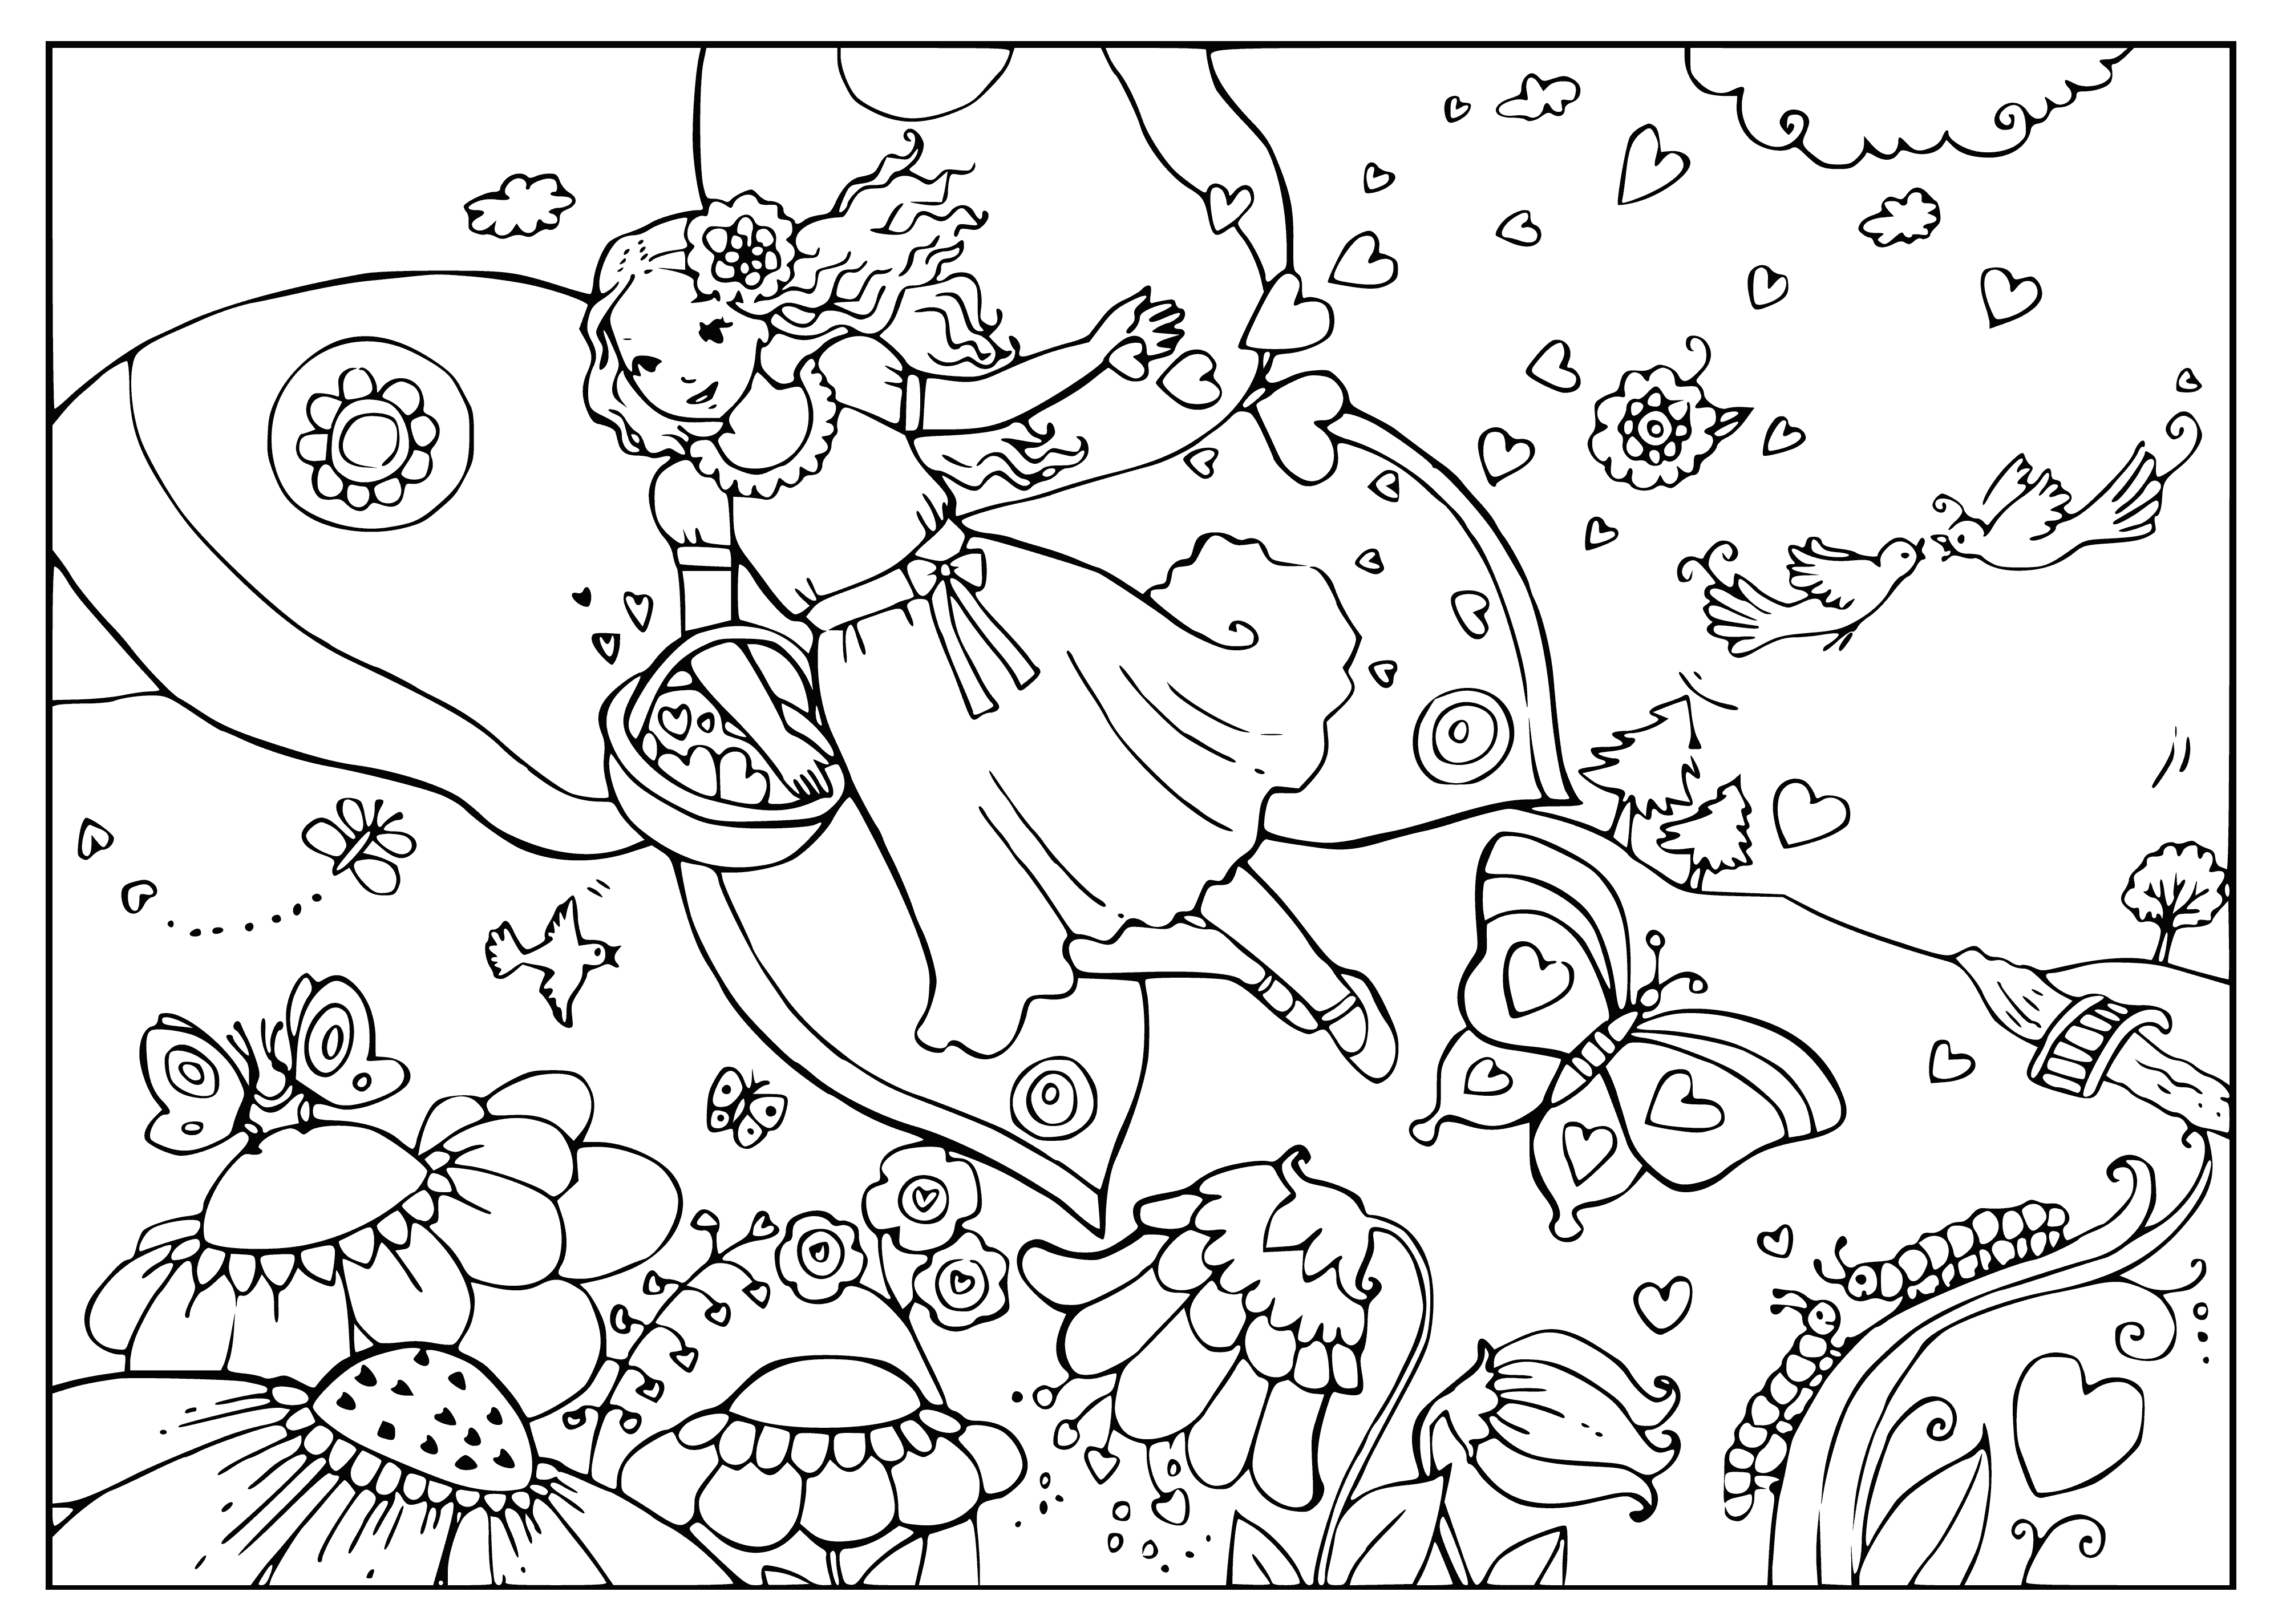 Fairy in a flower meadow coloring page